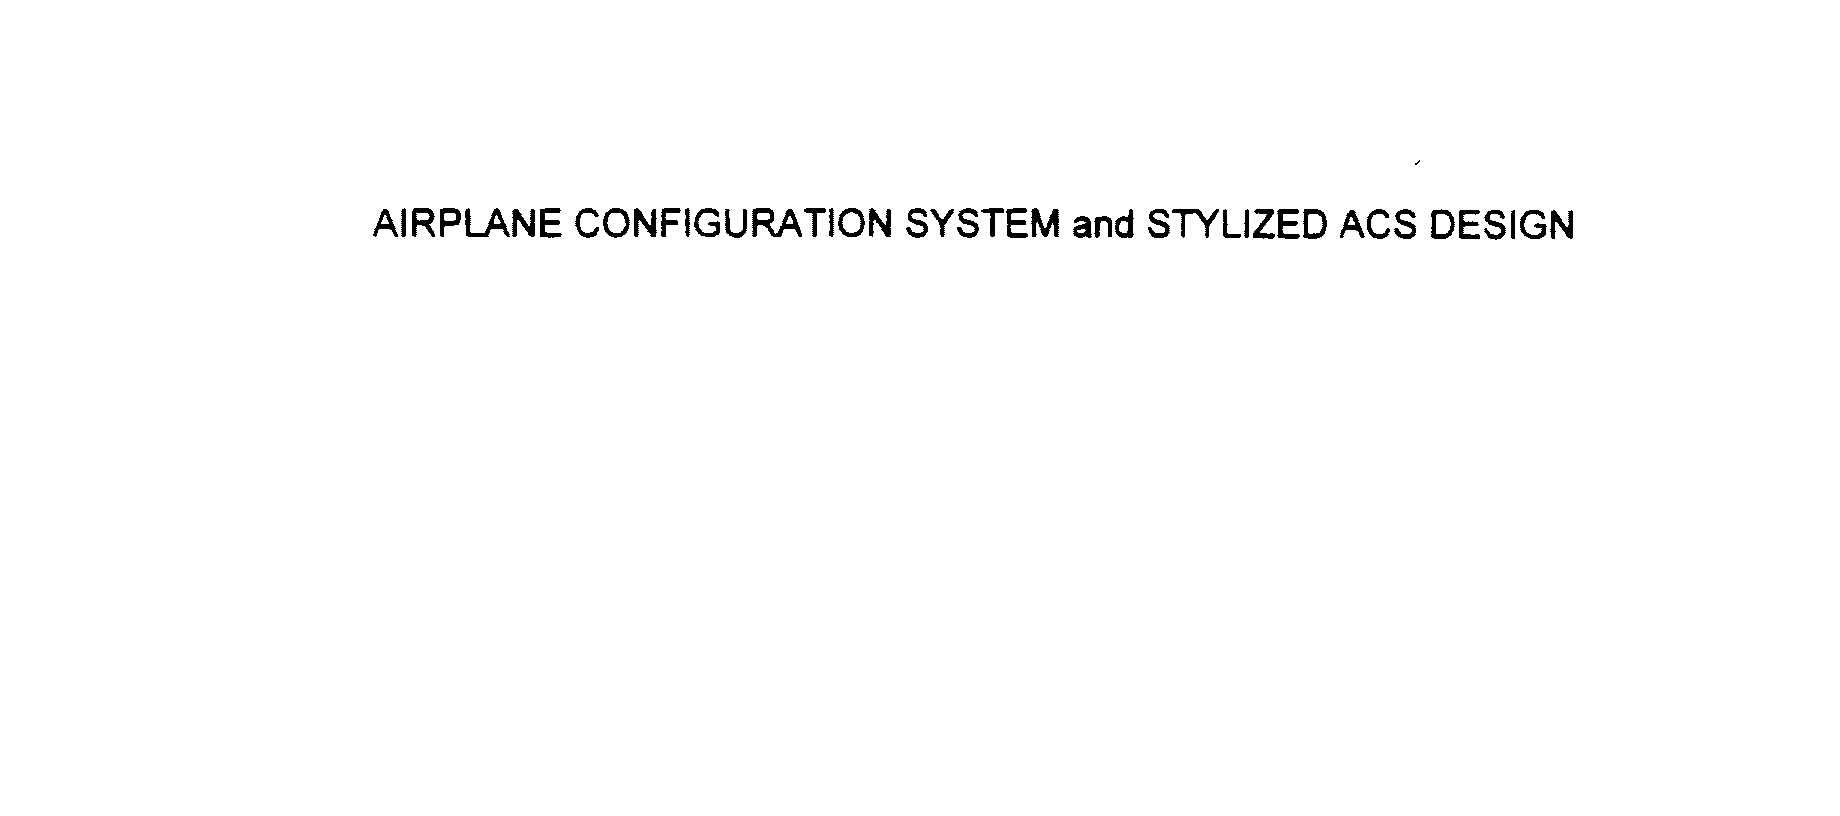  AIRPLANE CONFIGURATION SYSTEM AND STYLIZED ACS DESIGN